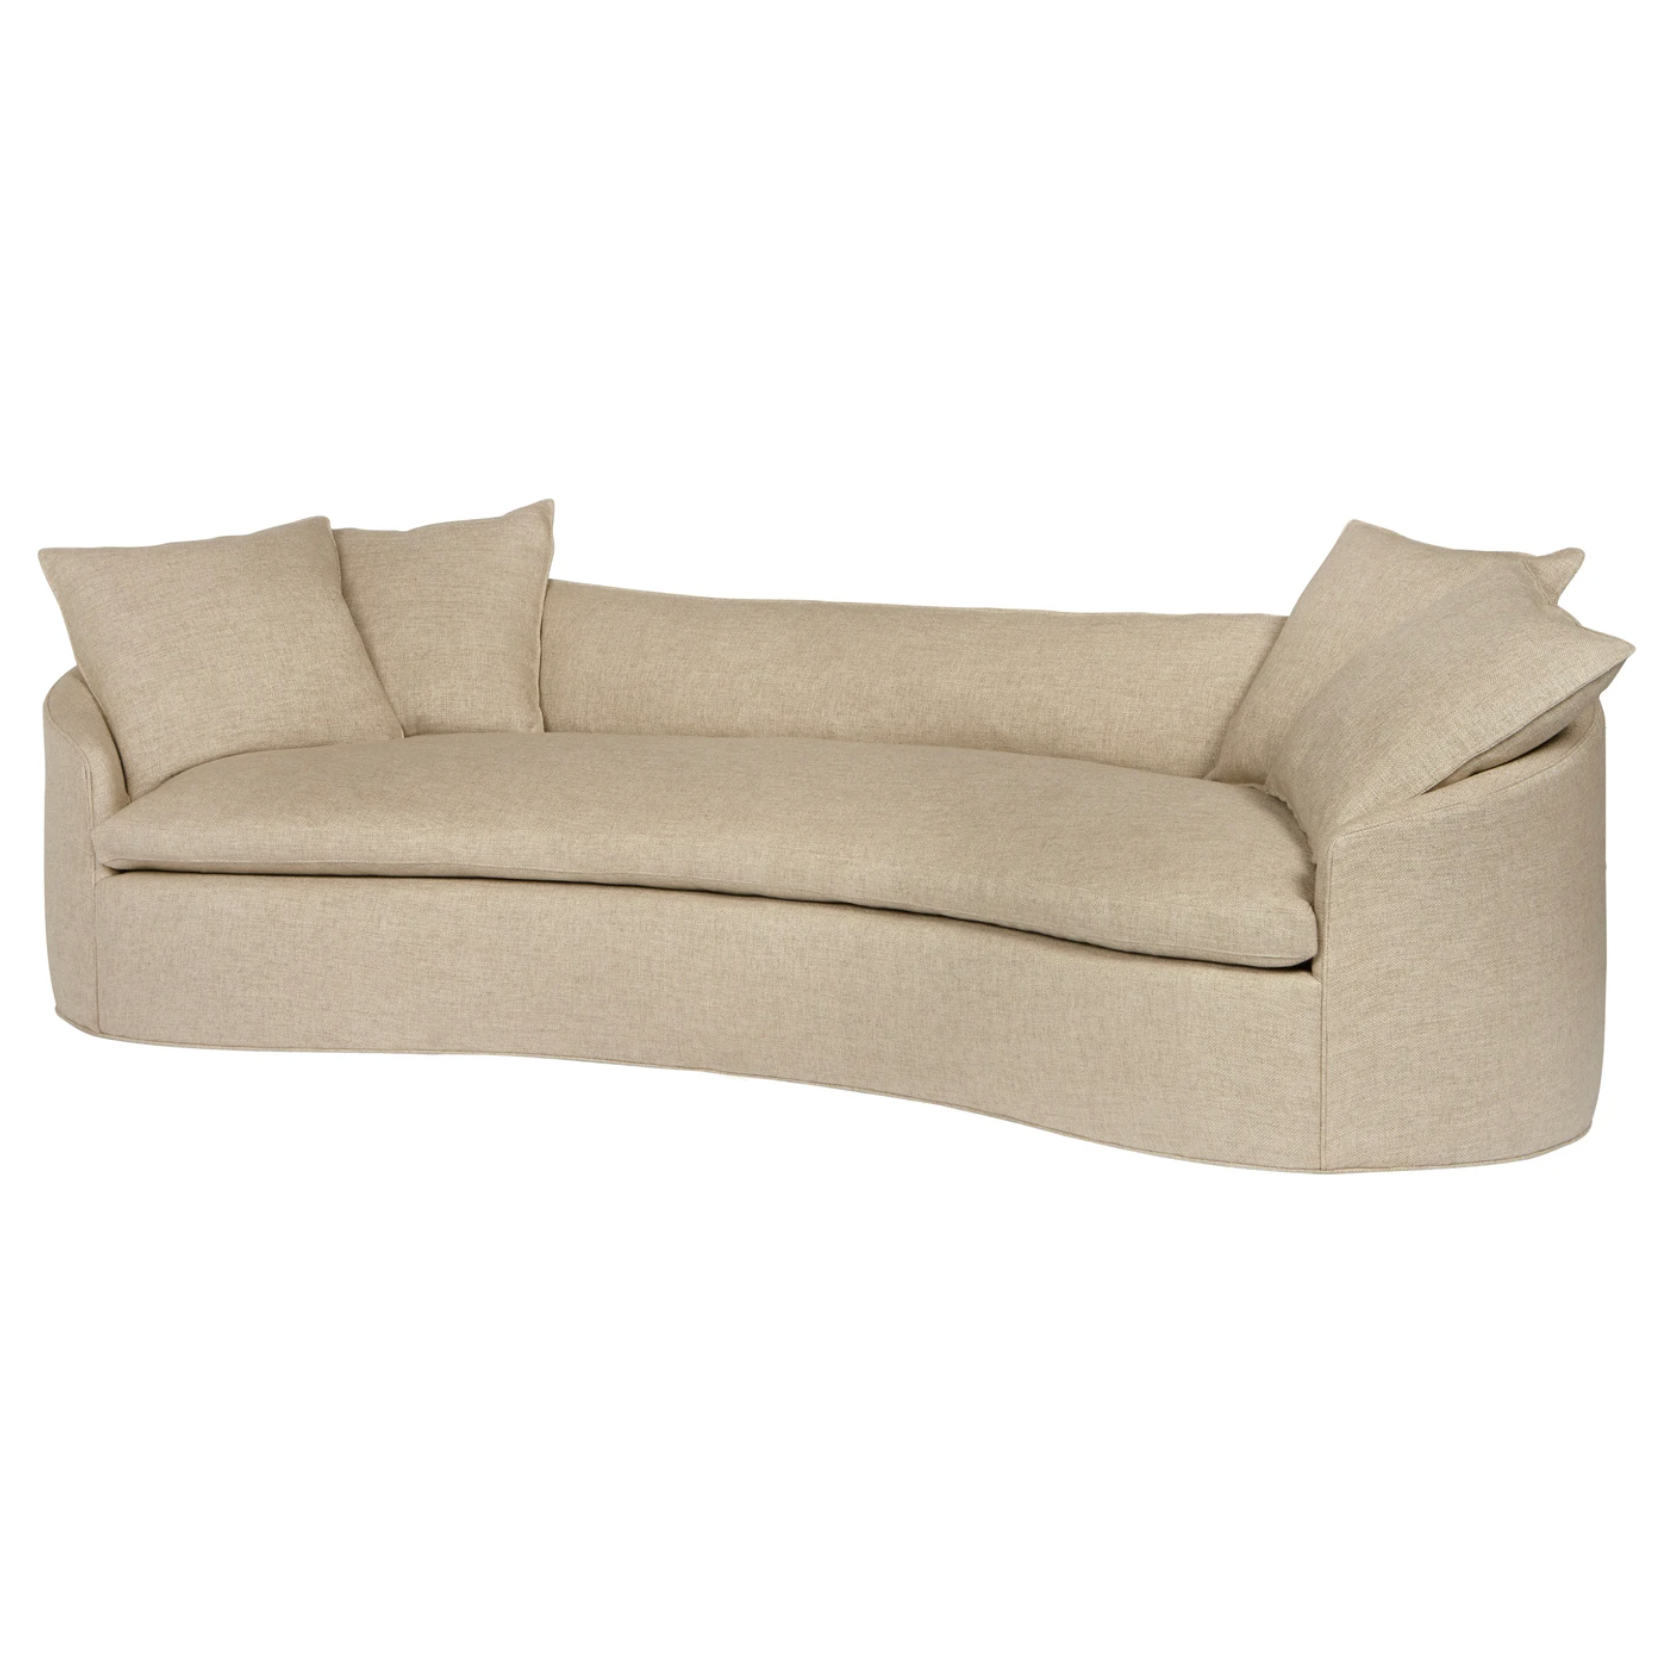 We love the unique, modern shape of this Grace 108" Sofa by Cisco Home. With the bench seat and curve shape, this will elevate your living space for years to come!   Overall: 108"w x 40"d x 28"h